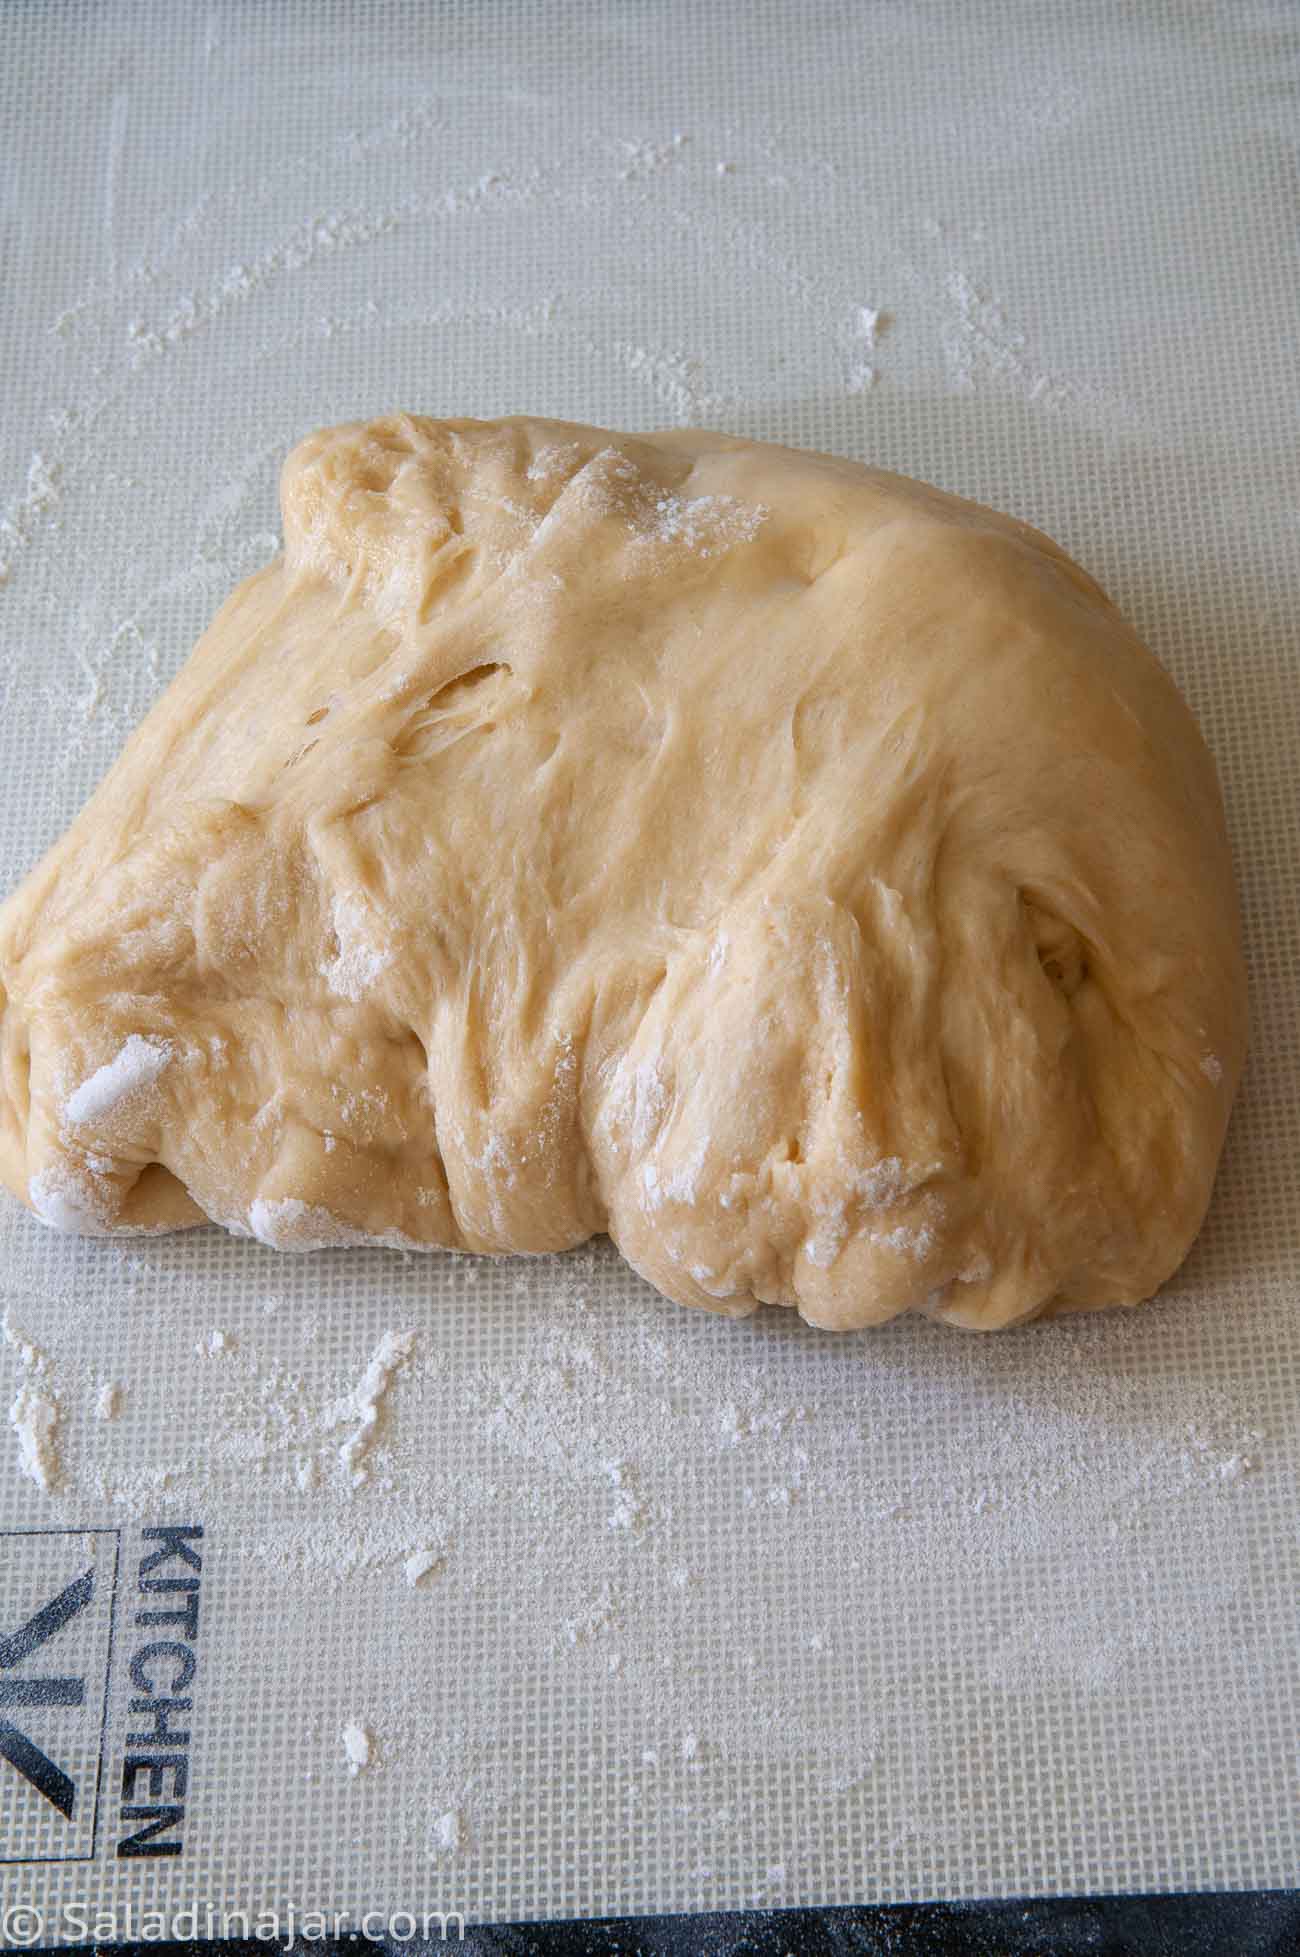 dough after it comes out of the bread machine